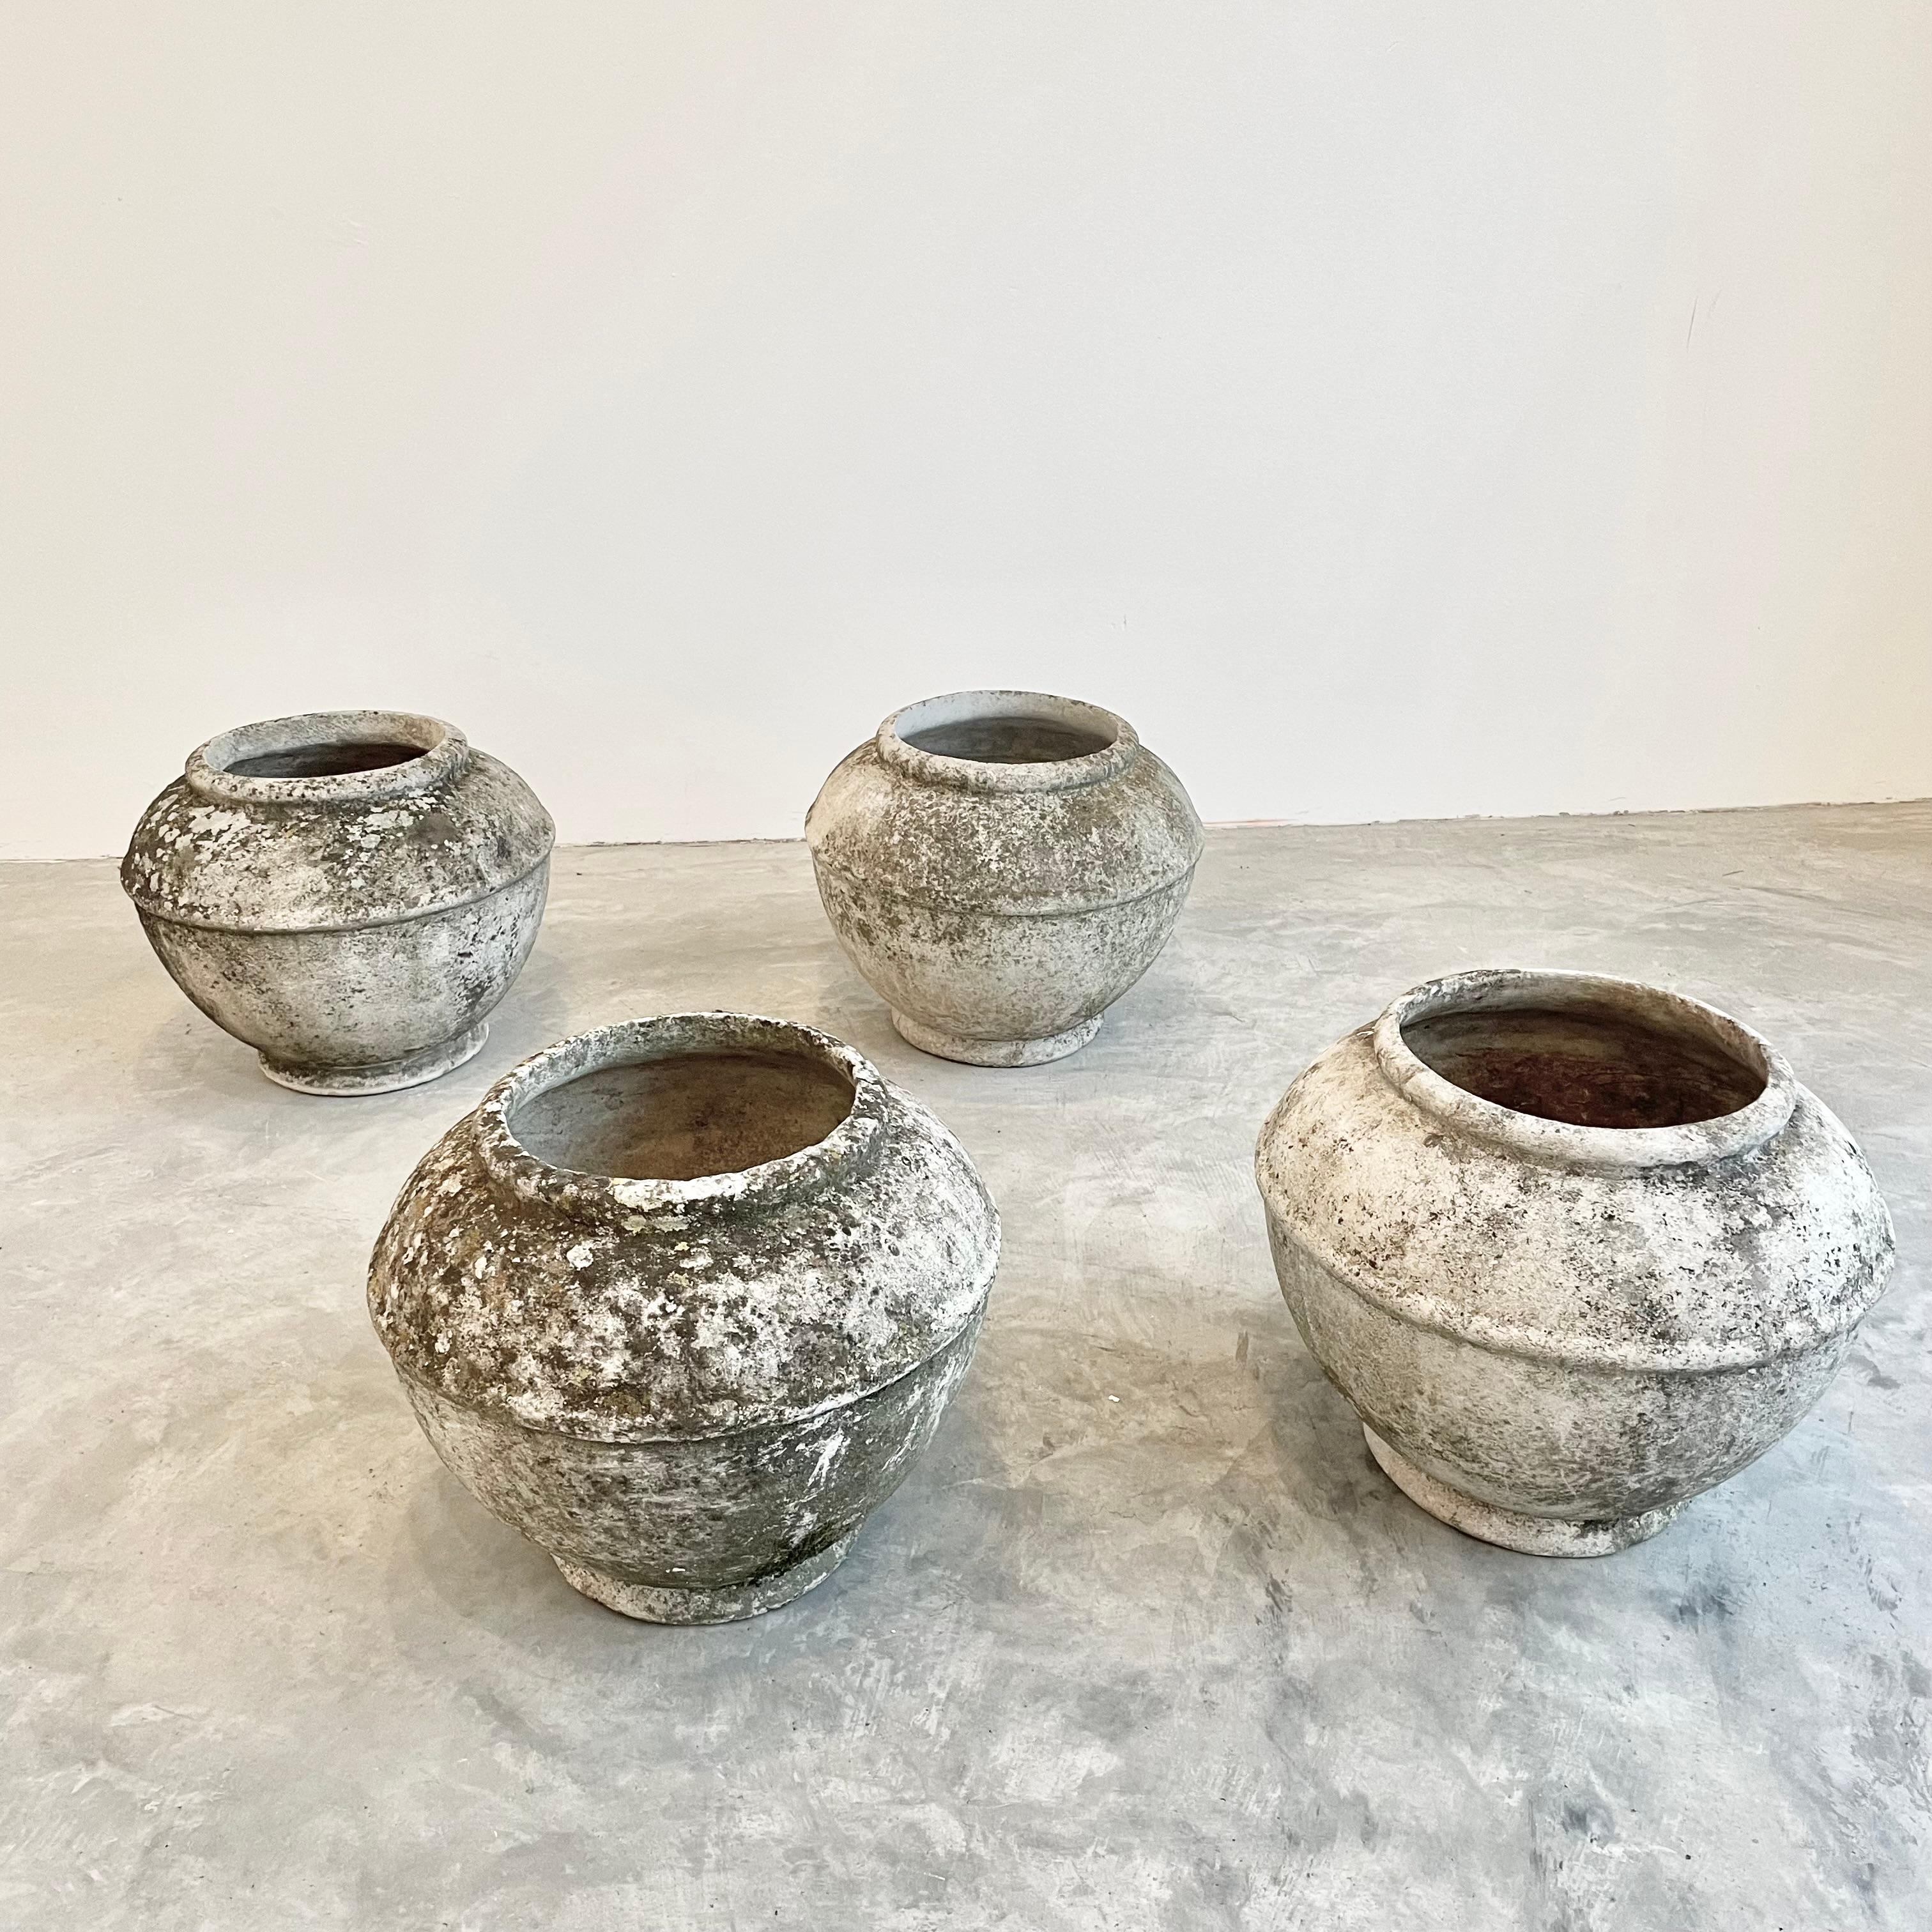 Fantastic concrete vases by Swiss architect Willy Guhl for Eternit. Great tabletop vase or planter in a stunning natural patina. Very unusual shape. Great indoors or outside. Each planter is dated 1969 or 1975 on the base. Simple design and very